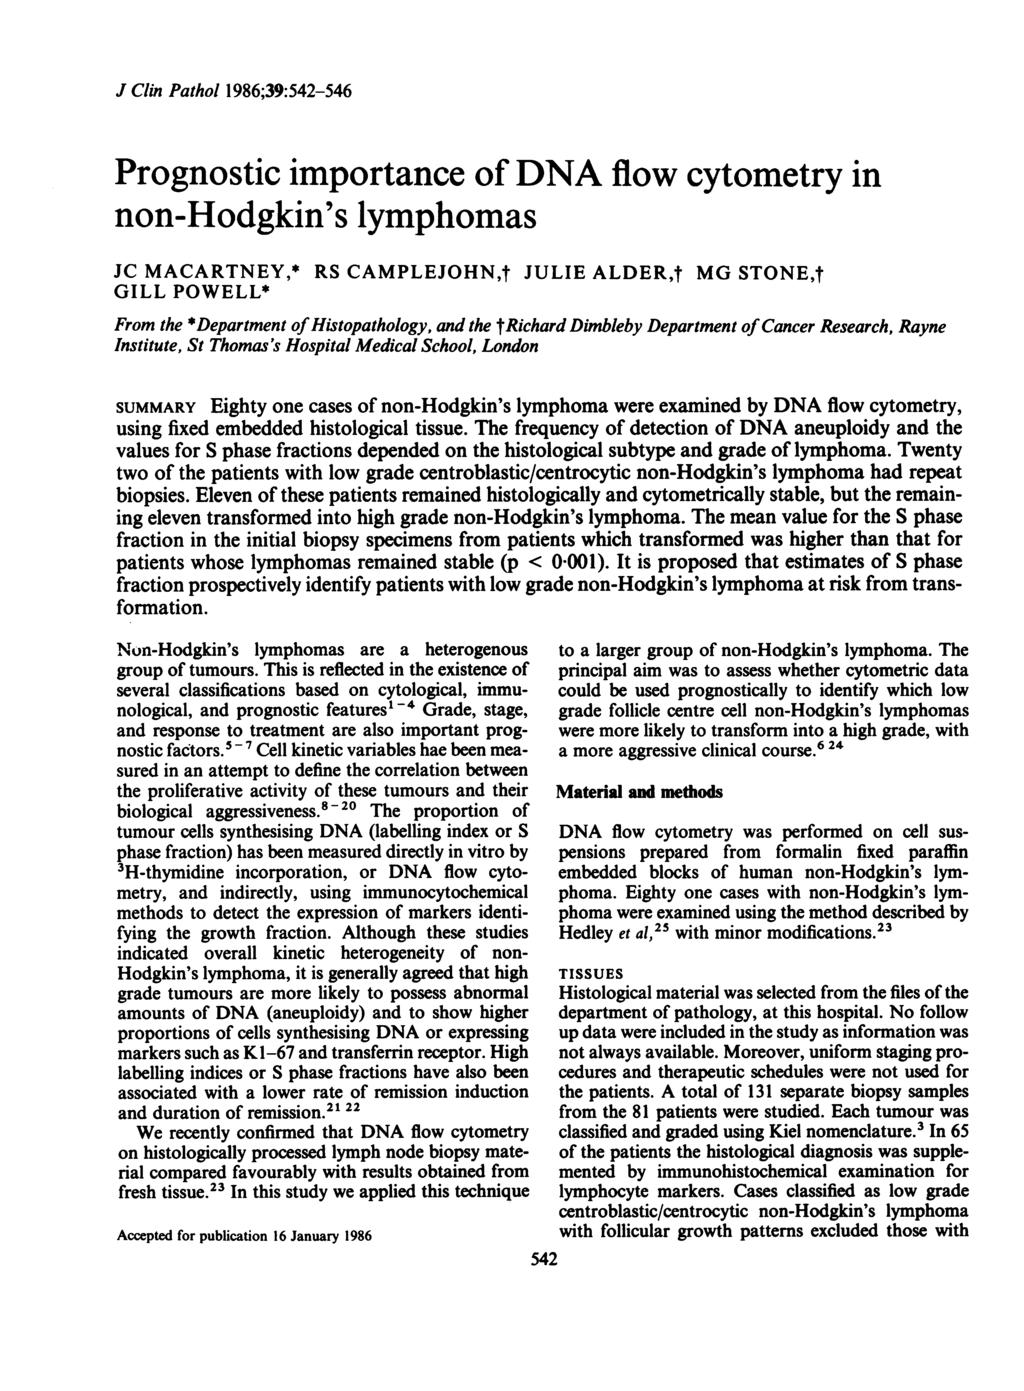 J Clin Pathol 1986;39:542-546 Prognostic importance of DNA flow cytometry in non-hodgkin's lymphomas JC MACARTNEY,* RS CAMPLEJOHN,t JULIE ALDER,f MG STONE,I GILL POWELL* From the *Department